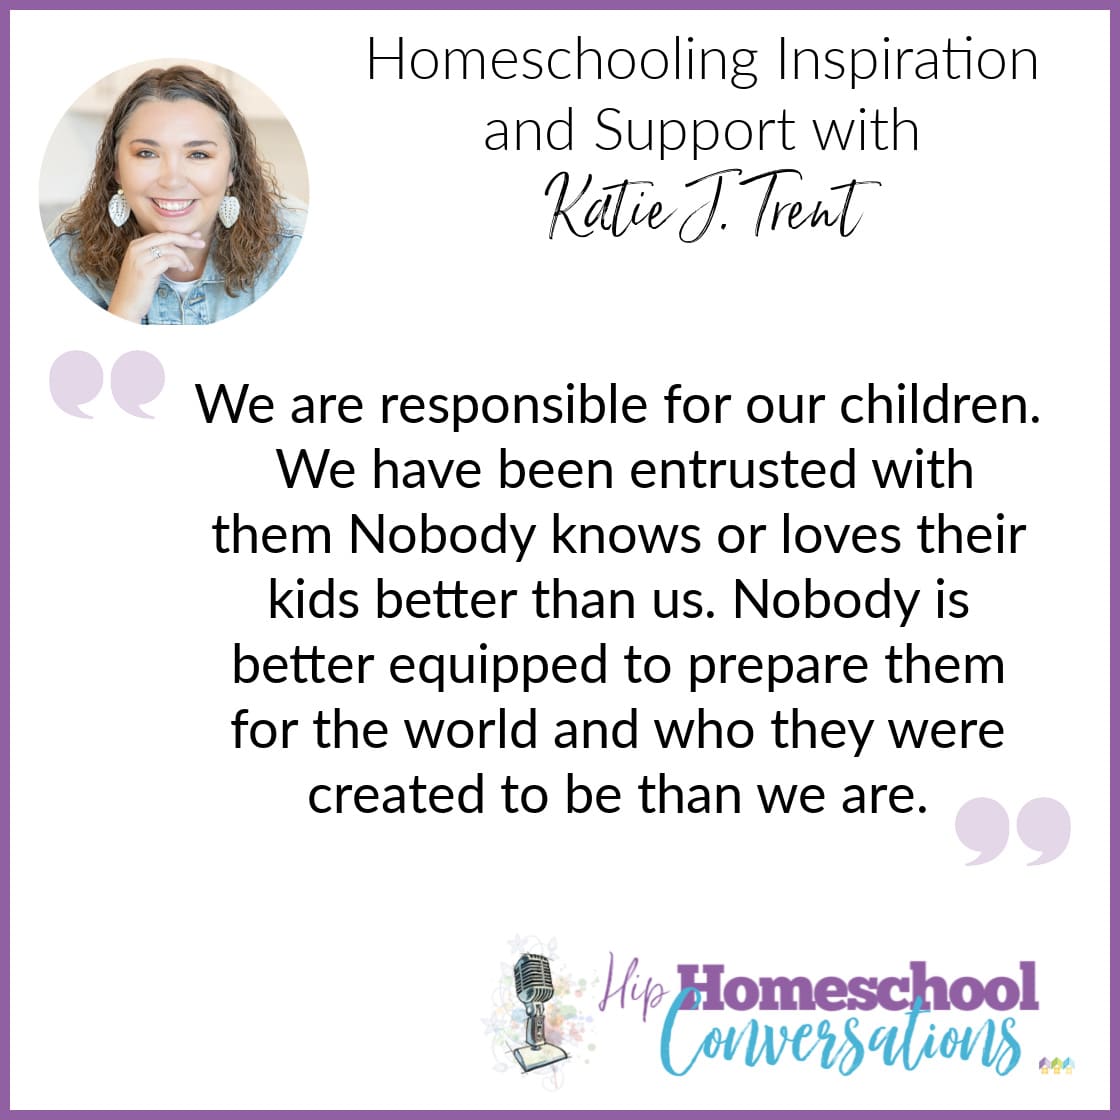 Are you already homeschooling and you’re tired of defending that decision? Maybe you just need a reminder that homeschooling is worth the time and effort. If you’re considering classical homeschooling, you’ll find helpful information as well. Whatever your situation, Katie J. Trent has words of wisdom for you!